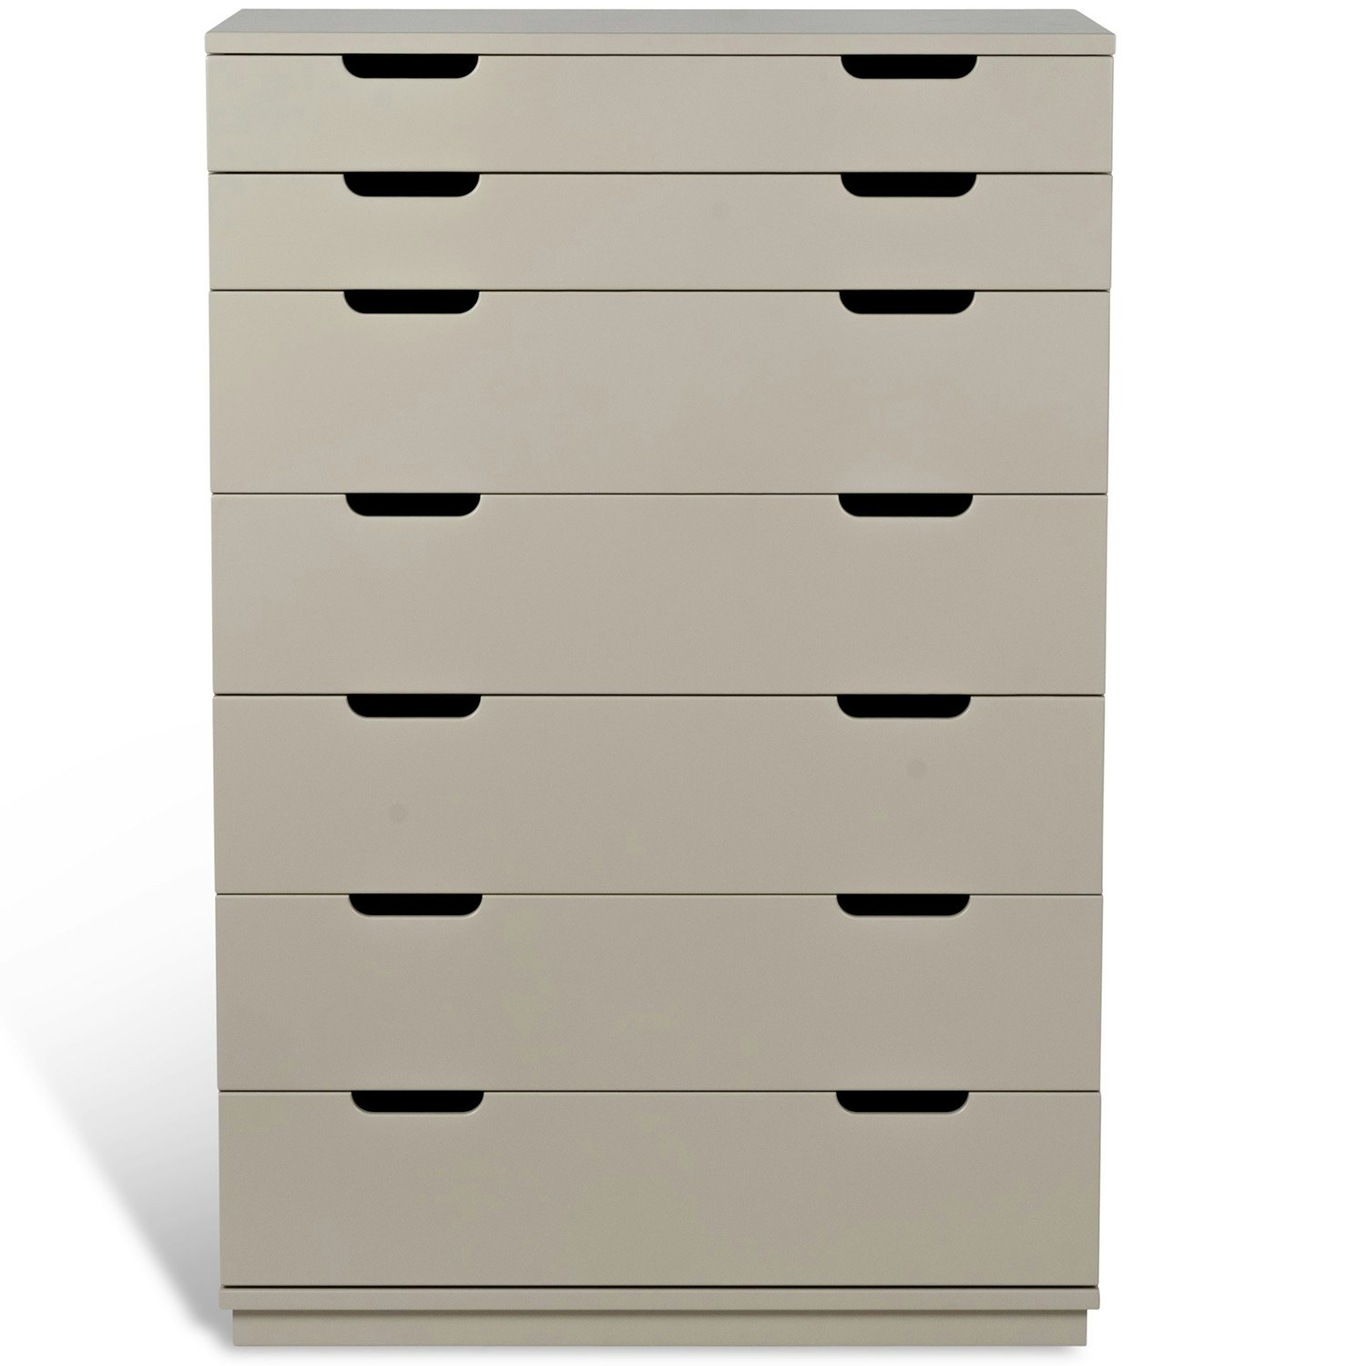 Aoko Chest Of Drawers With 7 Drawers, Beige